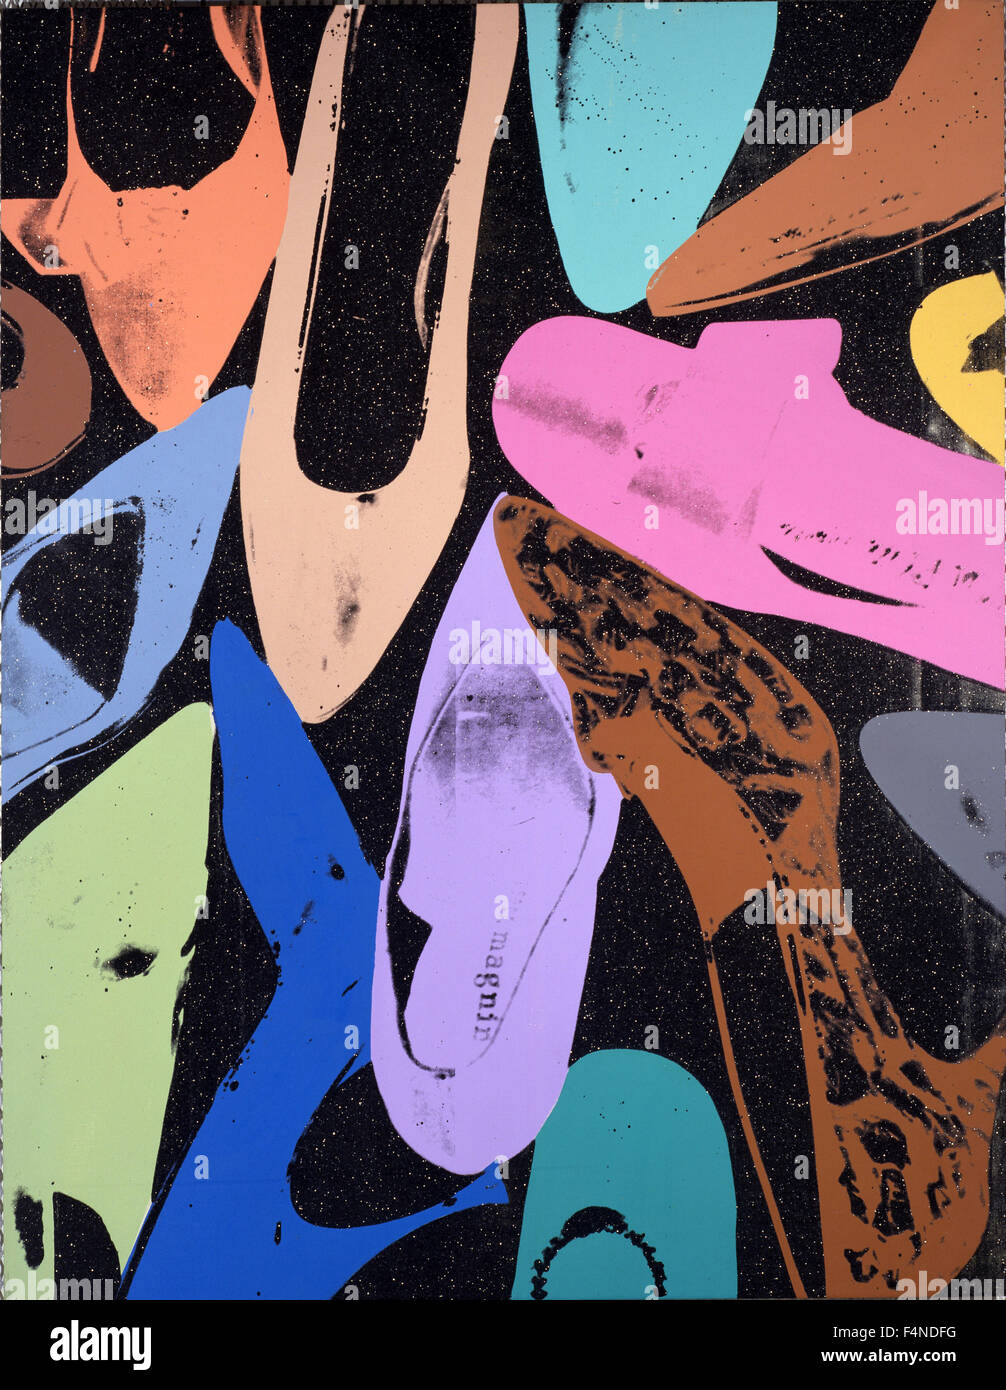 Troublesome Assassinate Suffocating Andy Warhol - Diamond Dust Shoes (Random Stock Photo - Alamy